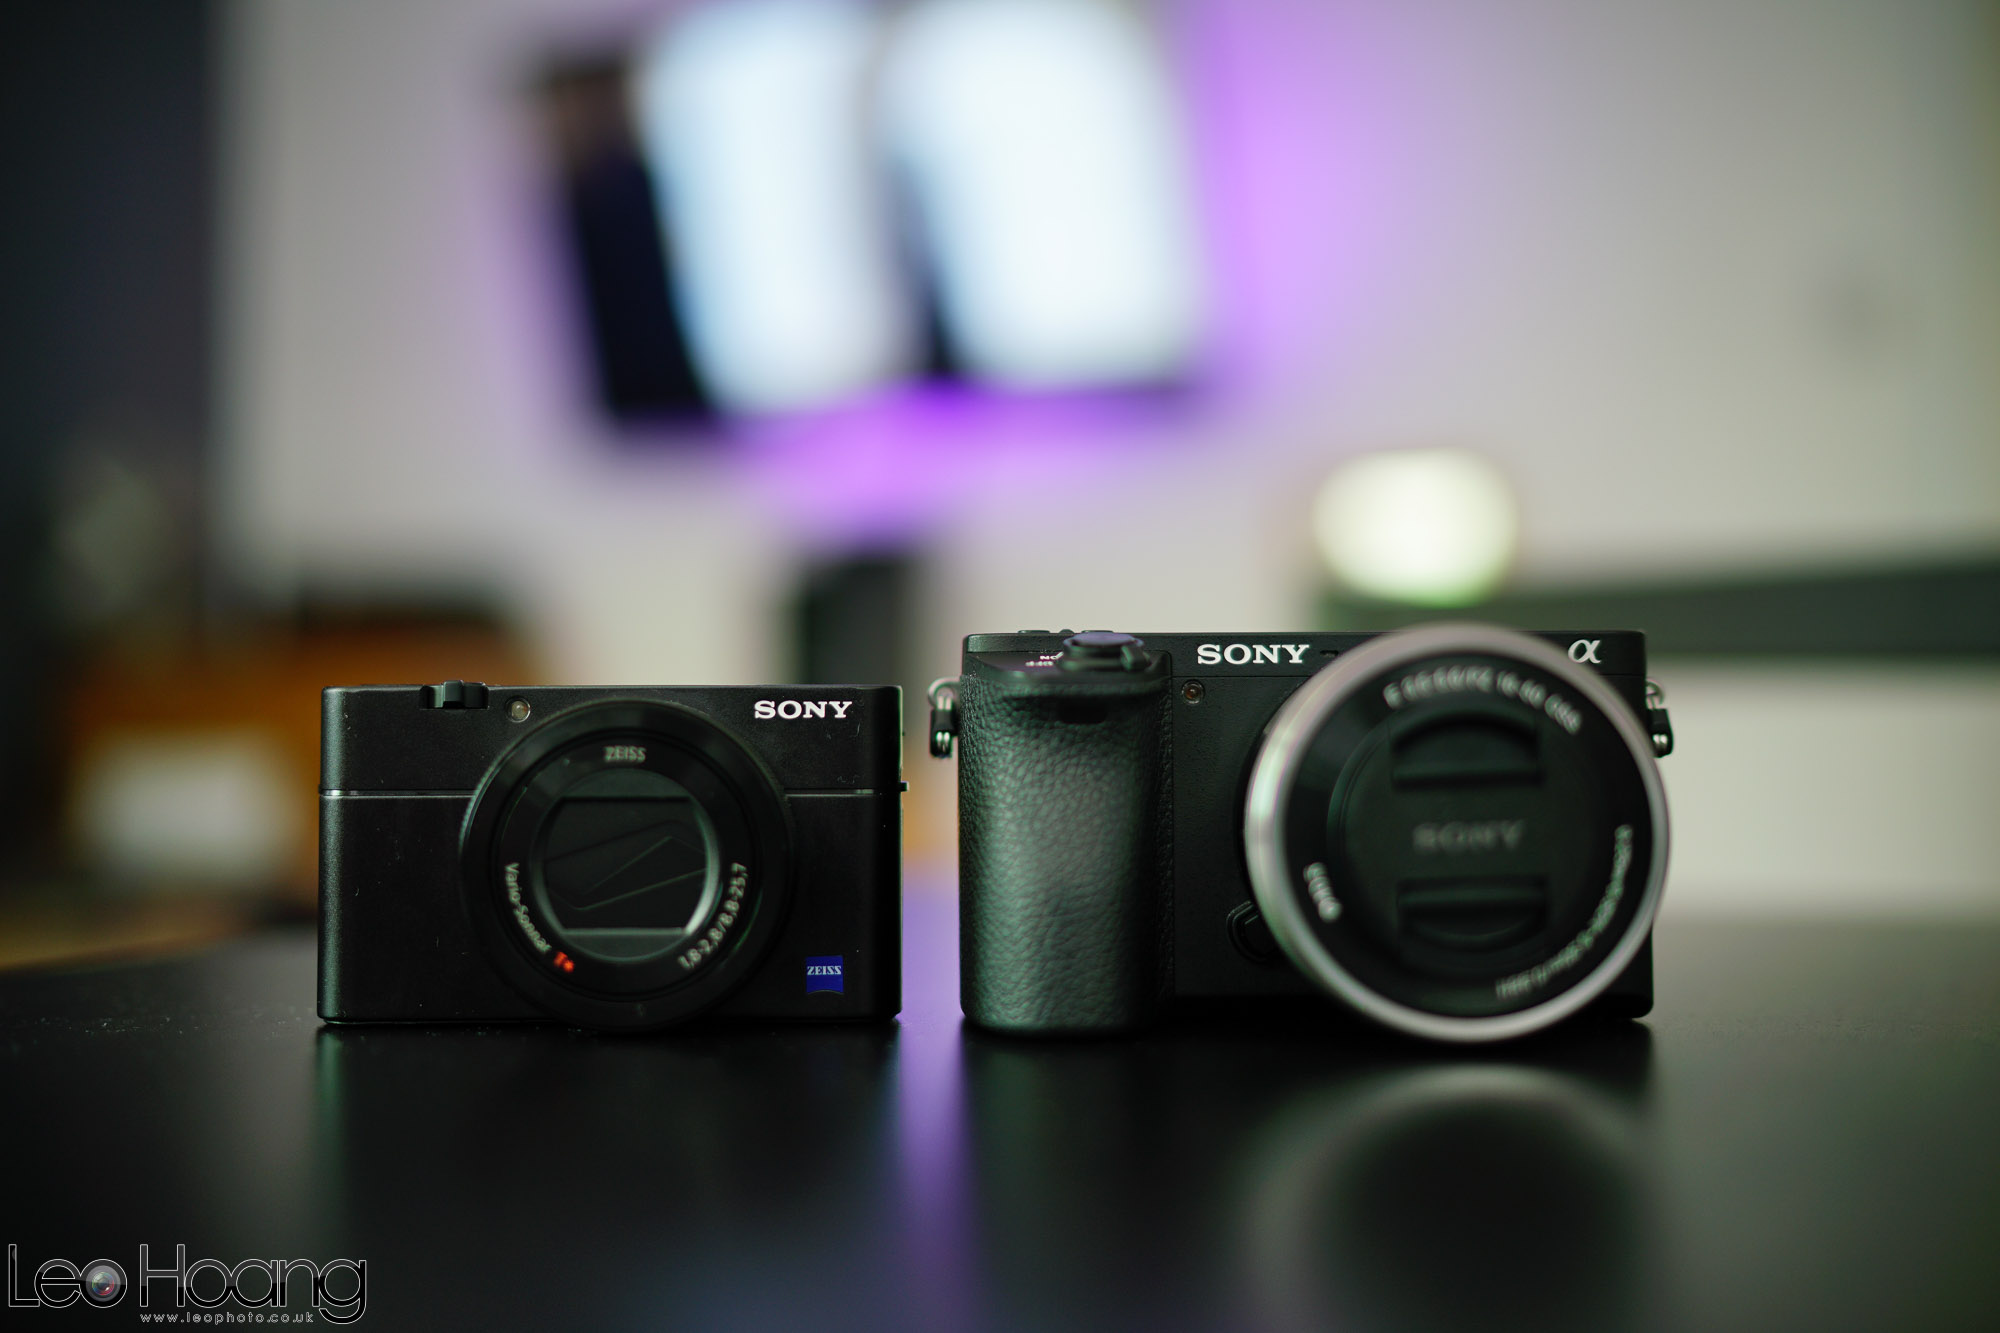 Sensor Size And Dof Comparison Sony Rx100m5 Vs Sony A6500 W 16 50mm F 3 5 5 6 Leo Hoang Photography